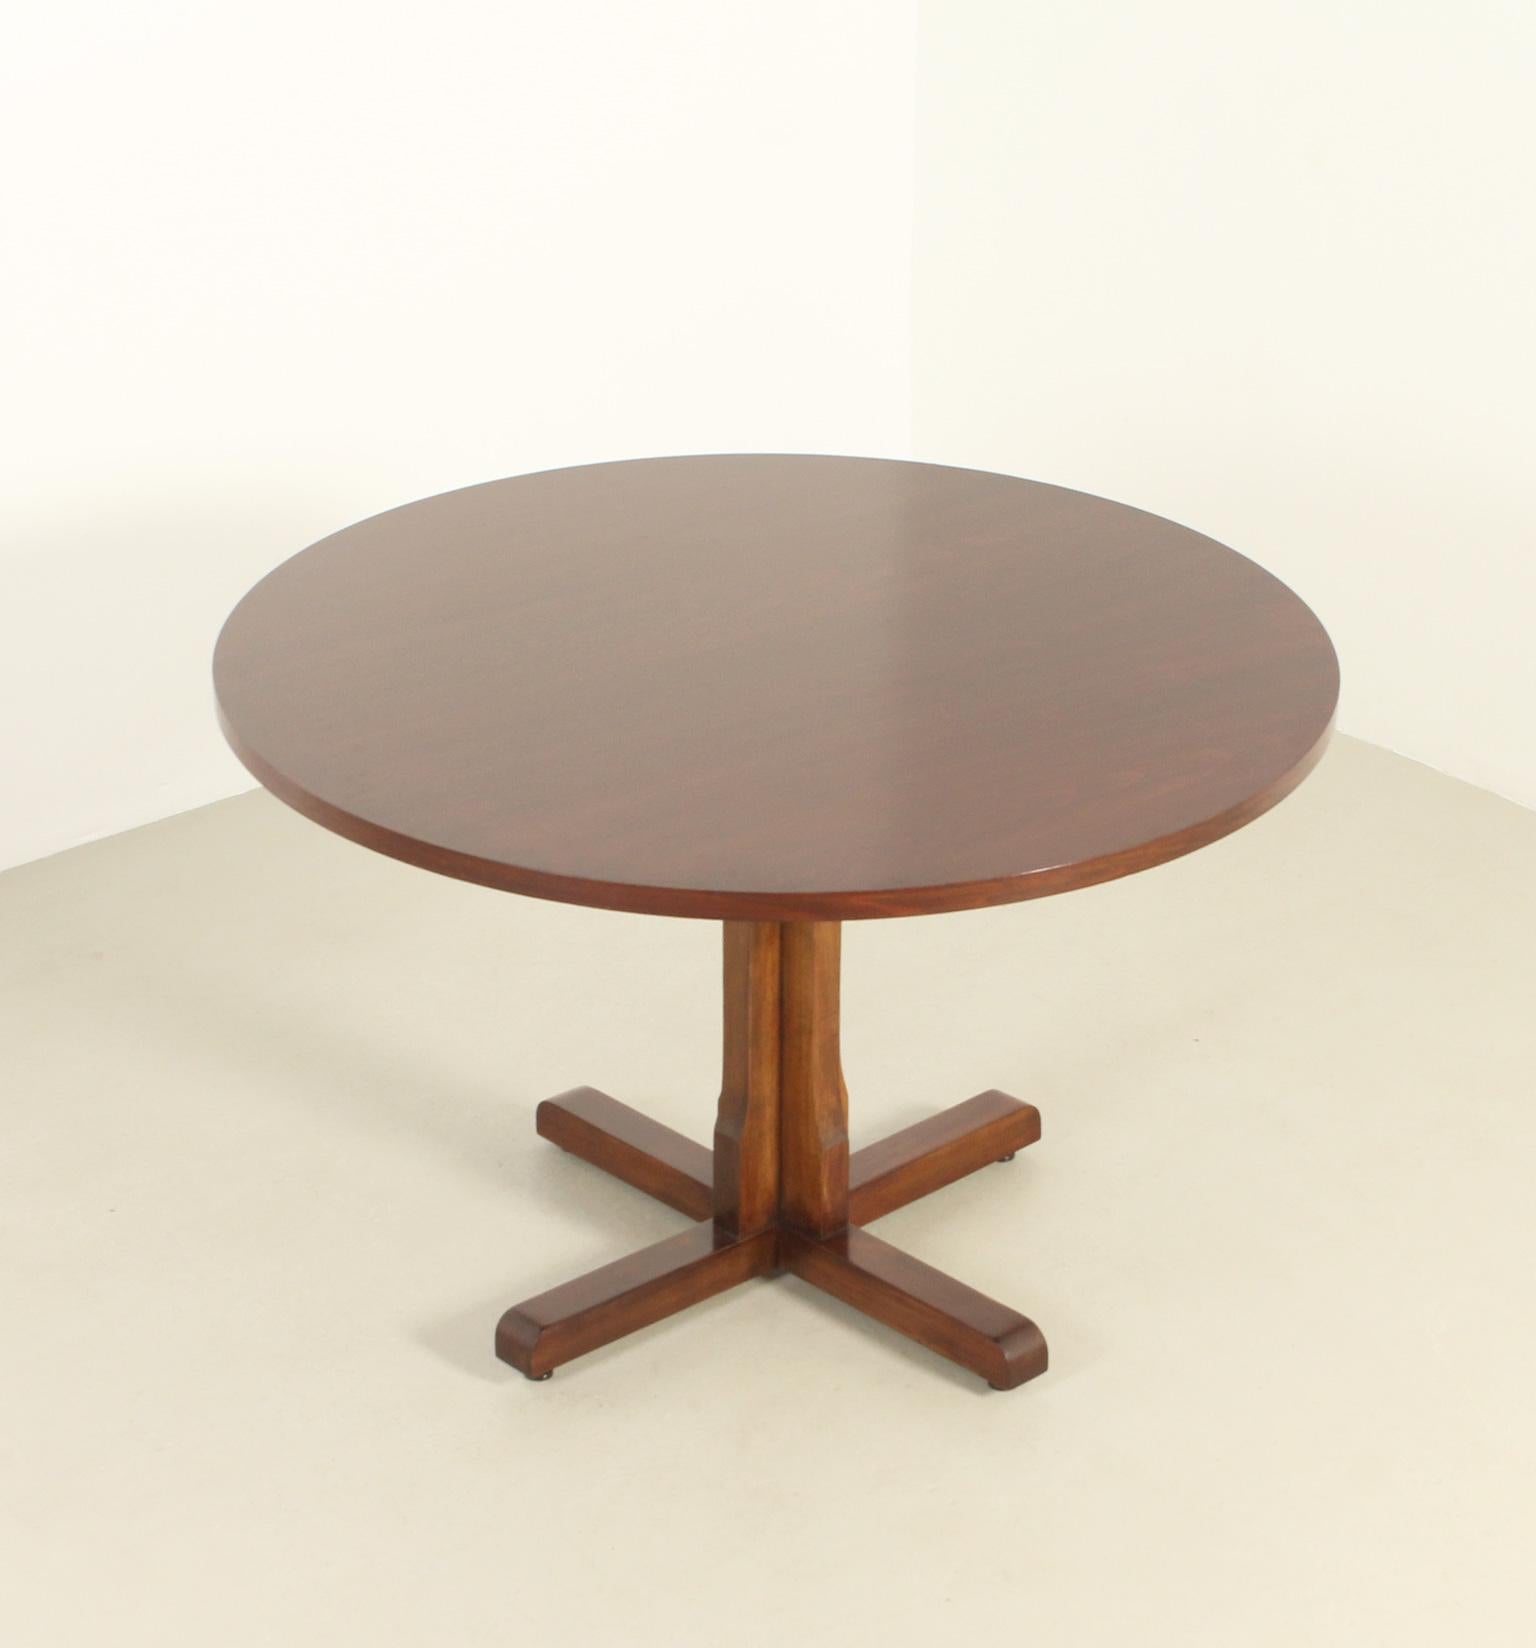 Round Dining Table in Walnut Wood by Jordi Vilanova, Spain, 1960's For Sale 3